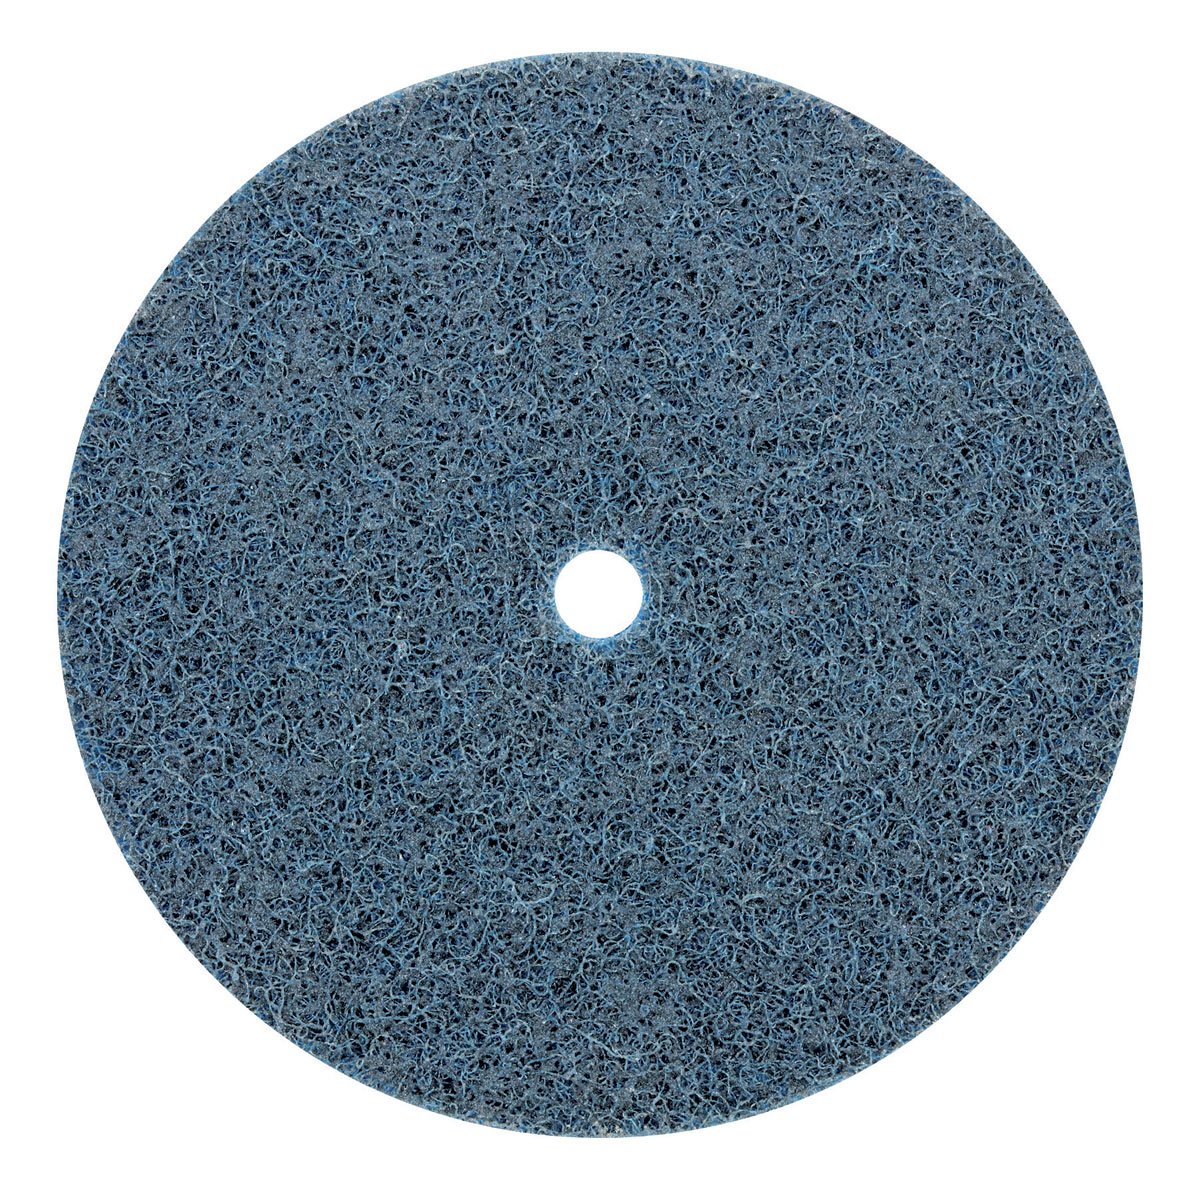 4-1/2" (114 mm) Dia. x 3/8" (10 mm) Very Fine DynaBrite Surface Conditioning Disc